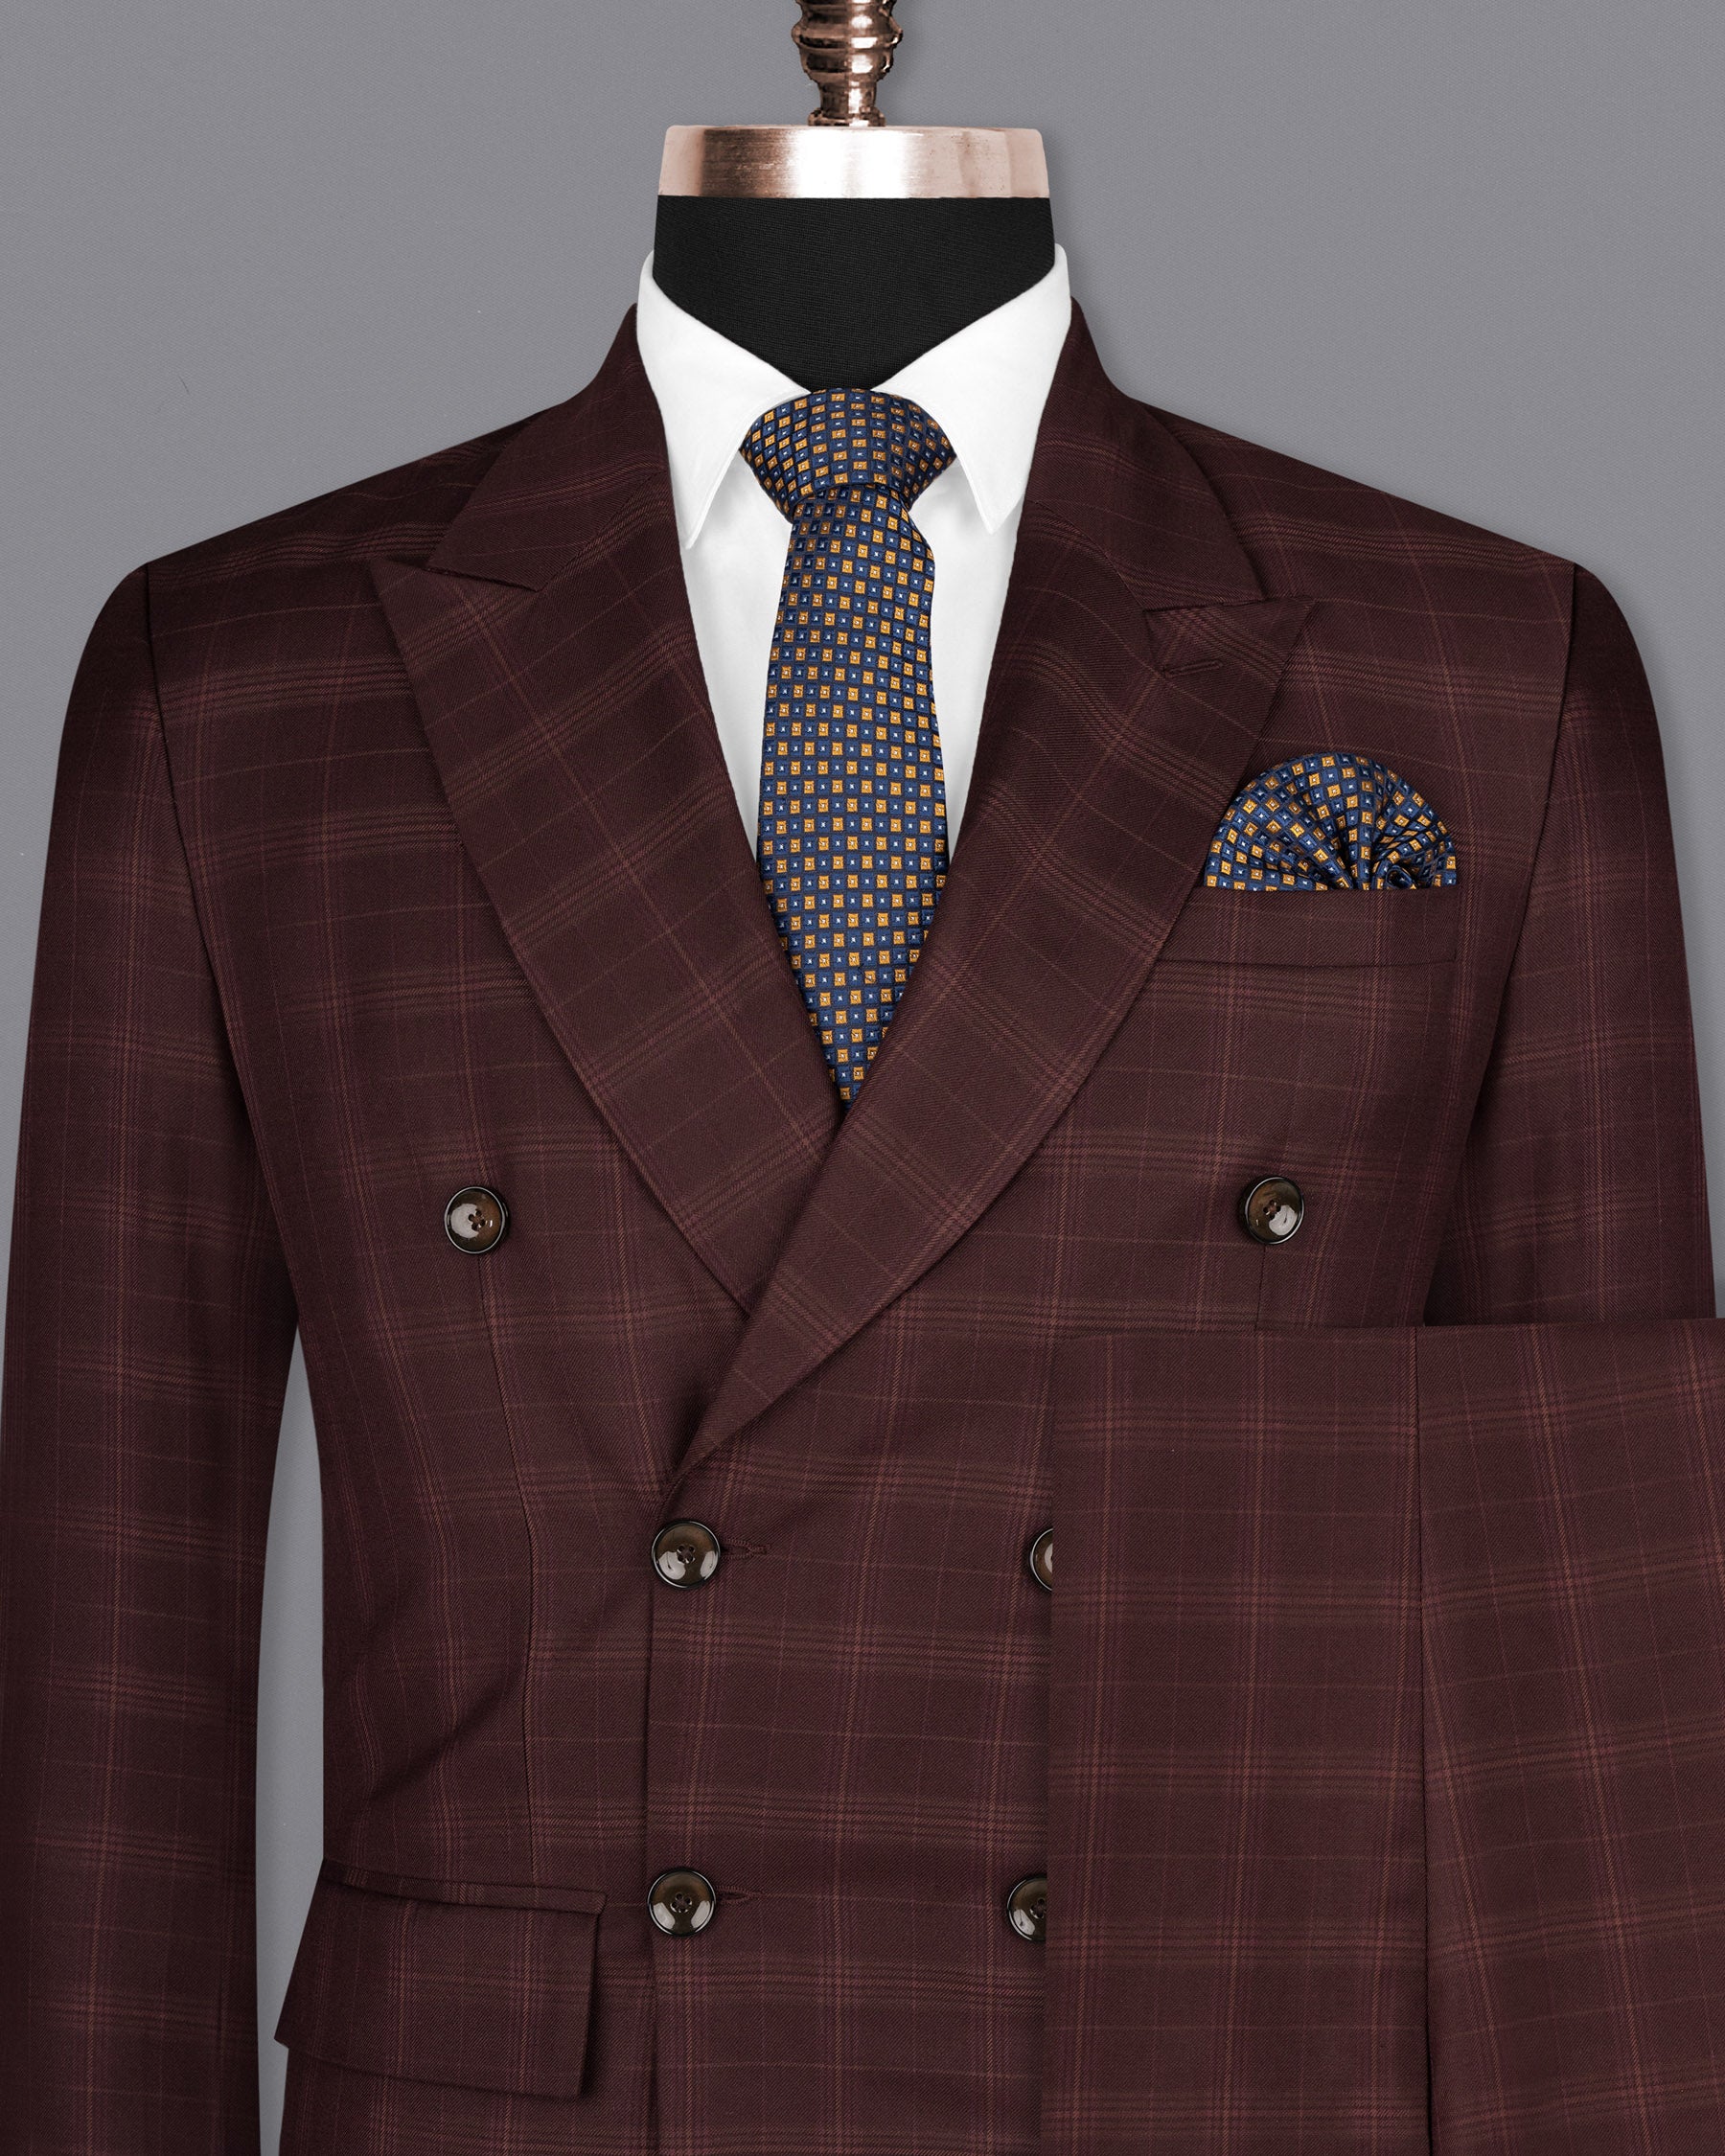 Crater Brown Super fine Plaid Double Breasted Wool Rich Suit ST1607-DB-36, ST1607-DB-38, ST1607-DB-40, ST1607-DB-42, ST1607-DB-44, ST1607-DB-46, ST1607-DB-48, ST1607-DB-50, ST1607-DB-52, ST1607-DB-54, ST1607-DB-56, ST1607-DB-58, ST1607-DB-60